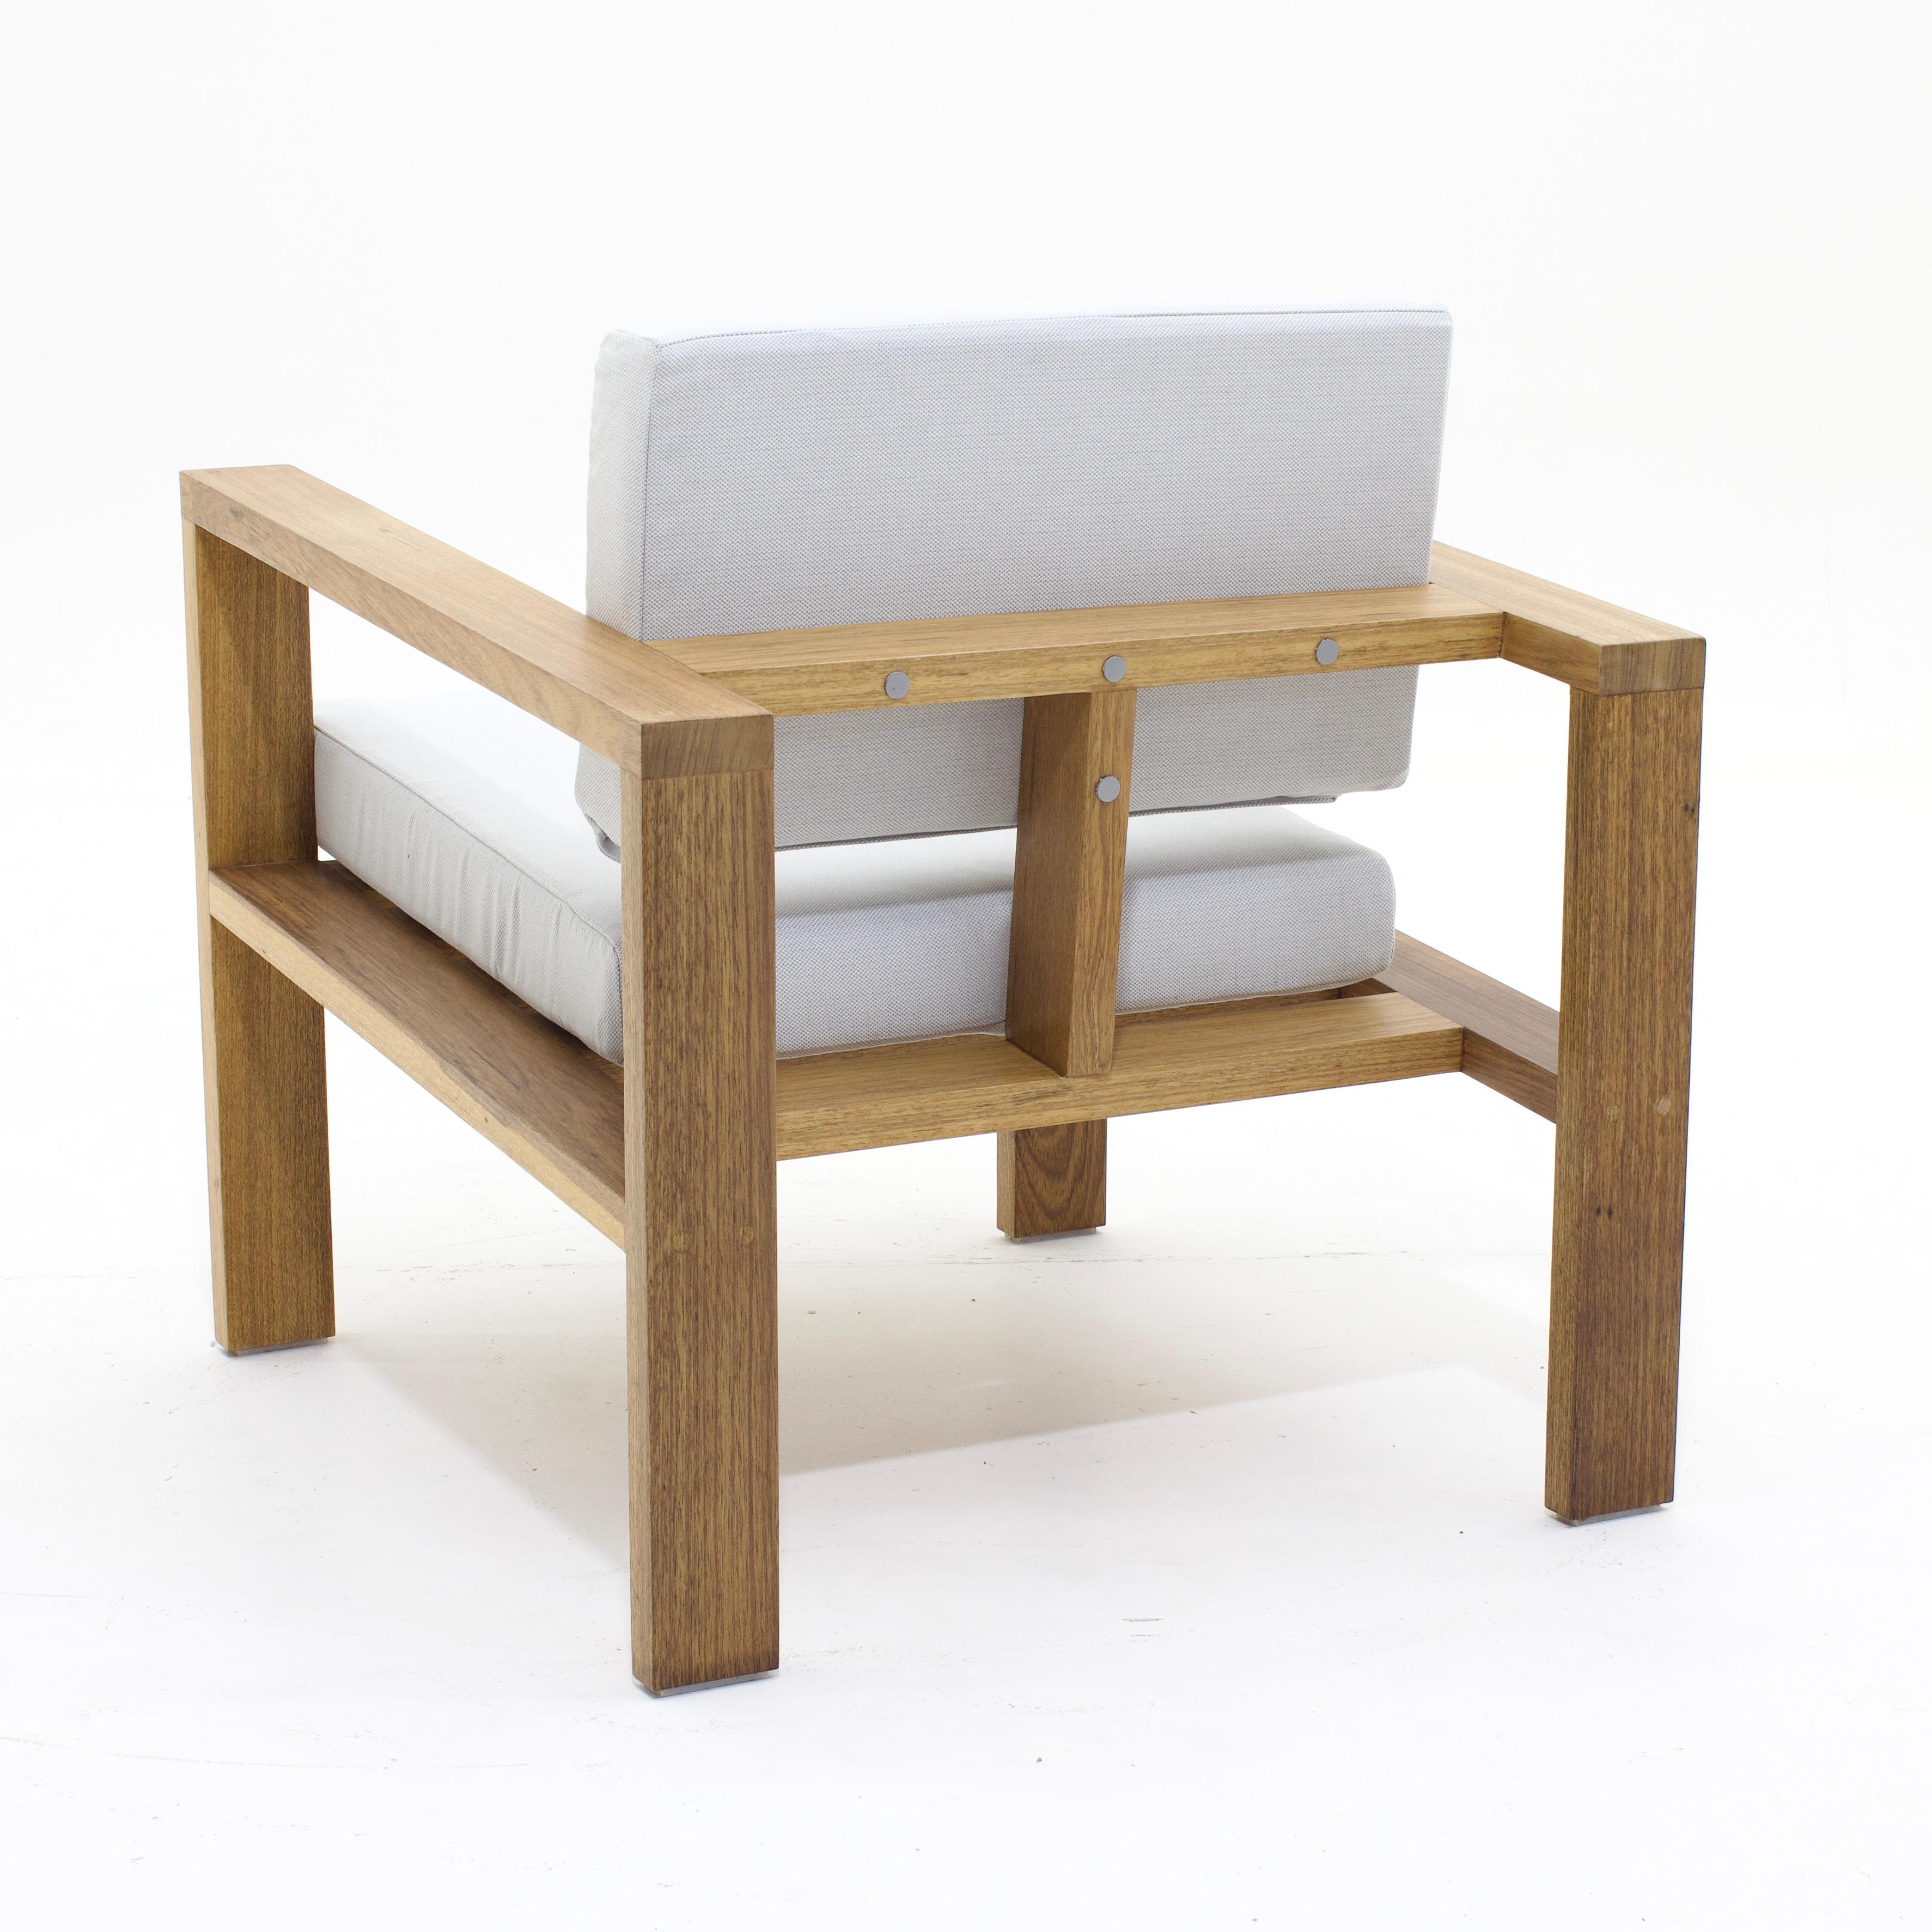 This timeless outdoor armchair is designed within an architectonic and geometric reasoning. The aim is to create a light and simple chair, with pure geometric shapes whose elements constitute its functioning. Its rectangular crossbars in solid wood